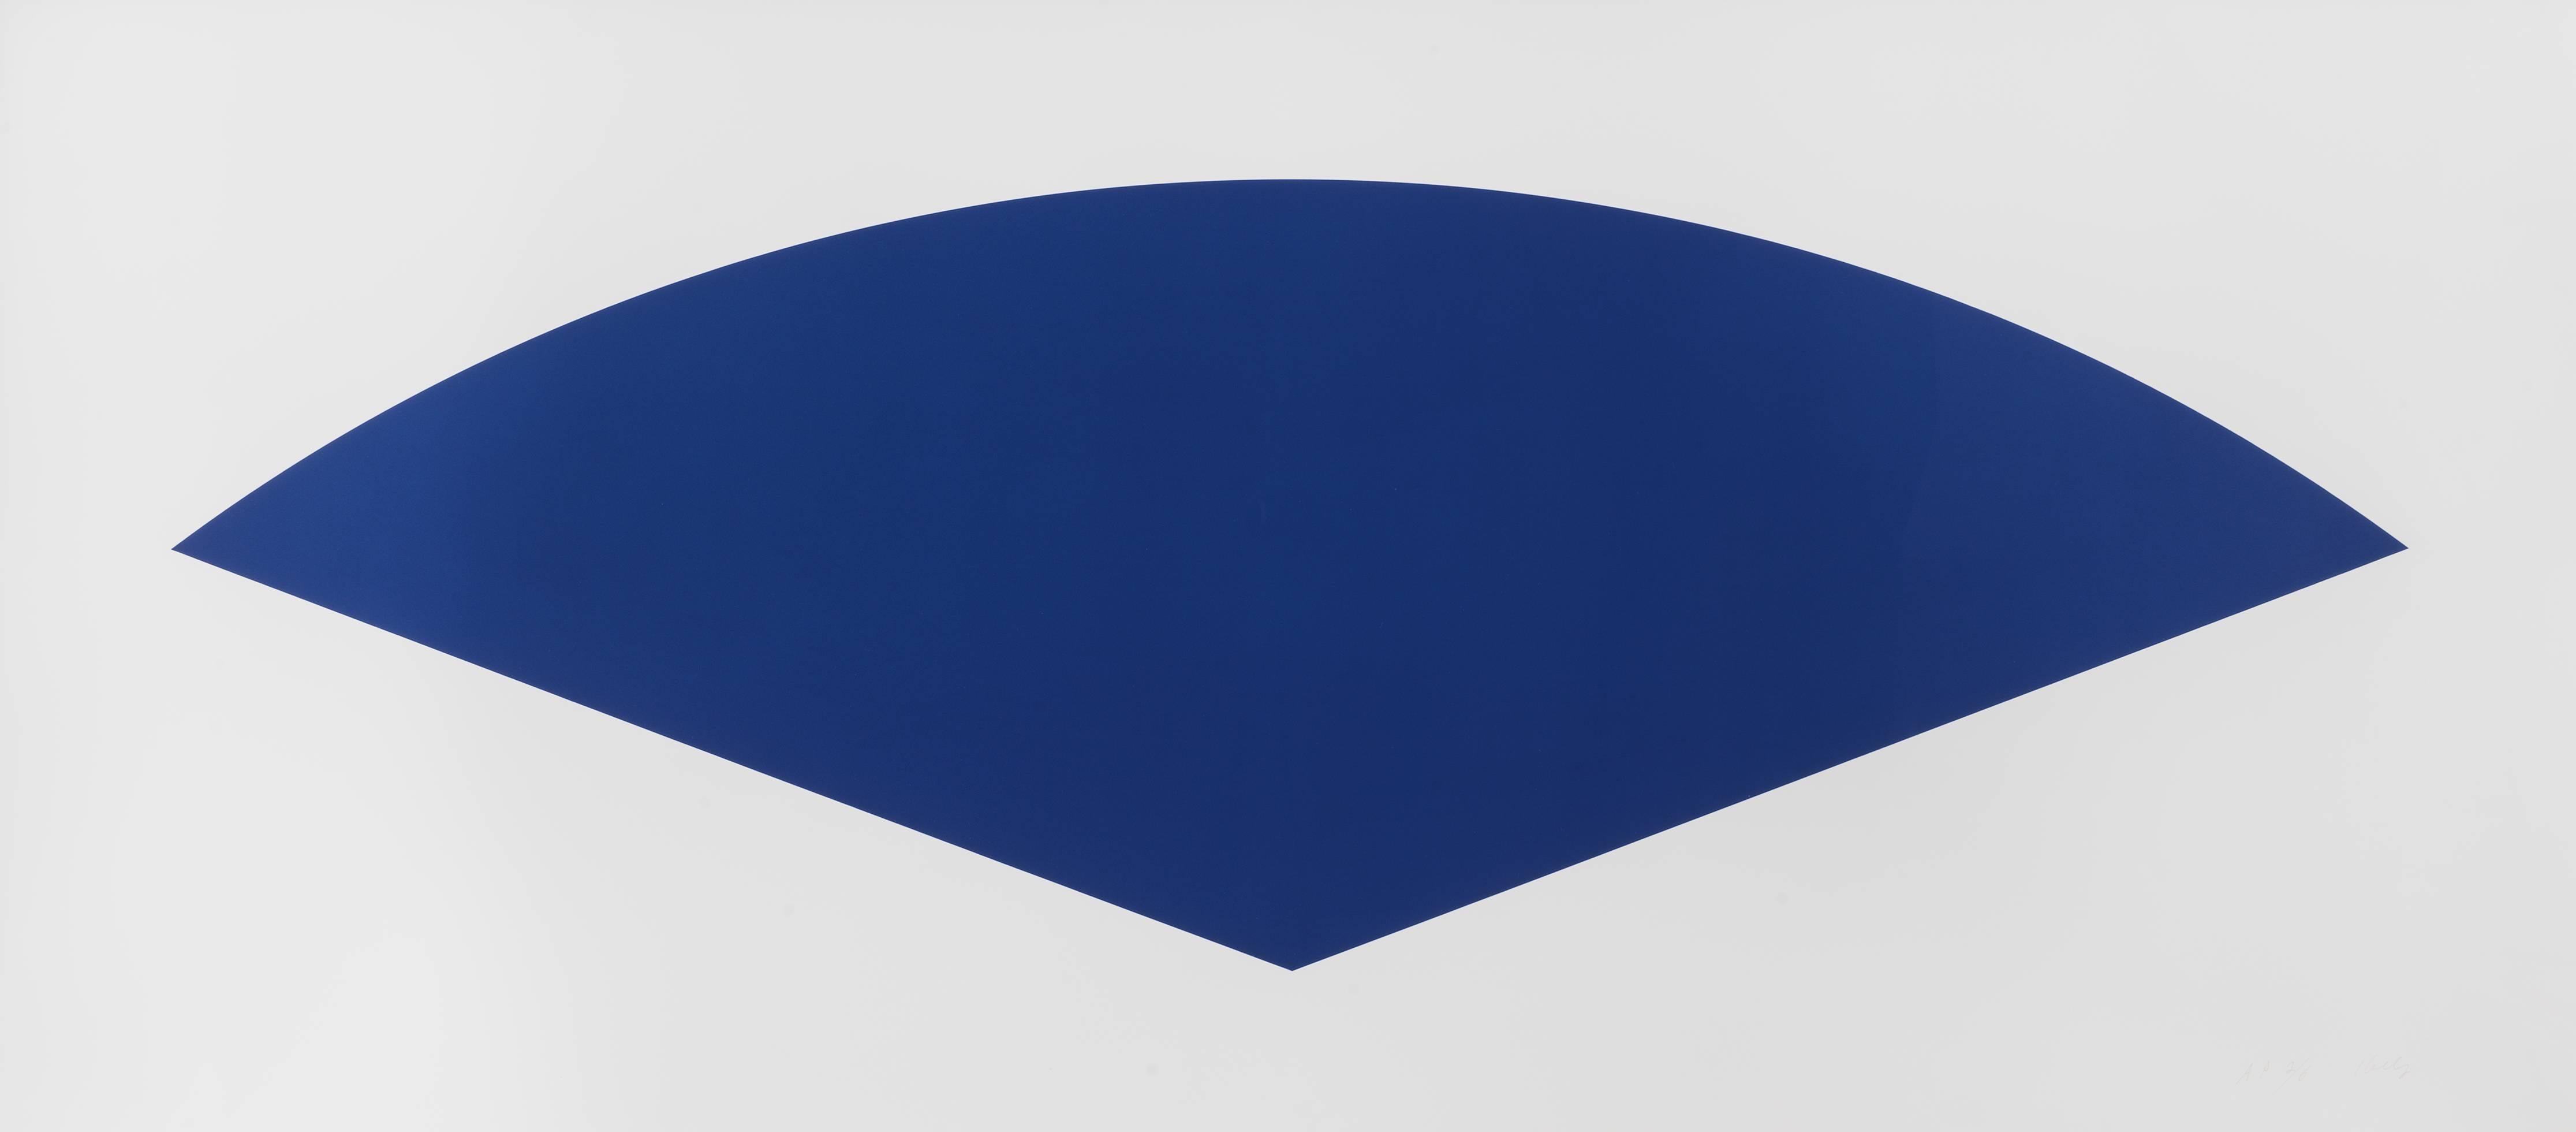 Ellsworth Kelly Abstract Print - Blue Curve (State III)